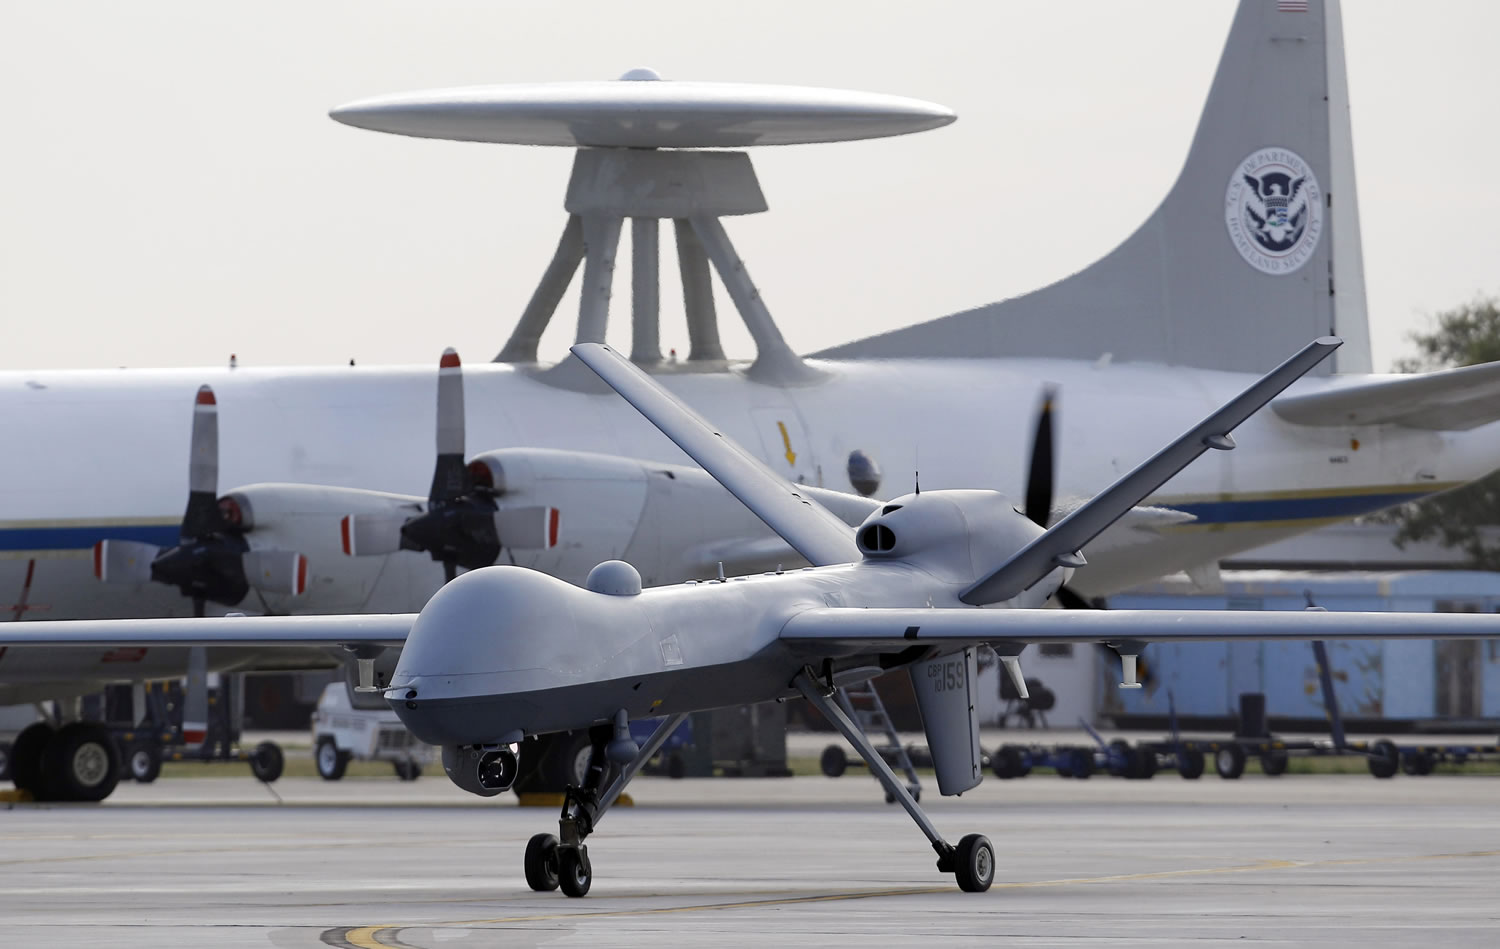 A Predator B unmanned aircraft taxis in November 2011 at the Naval Air Station in Corpus Christi, Texas.